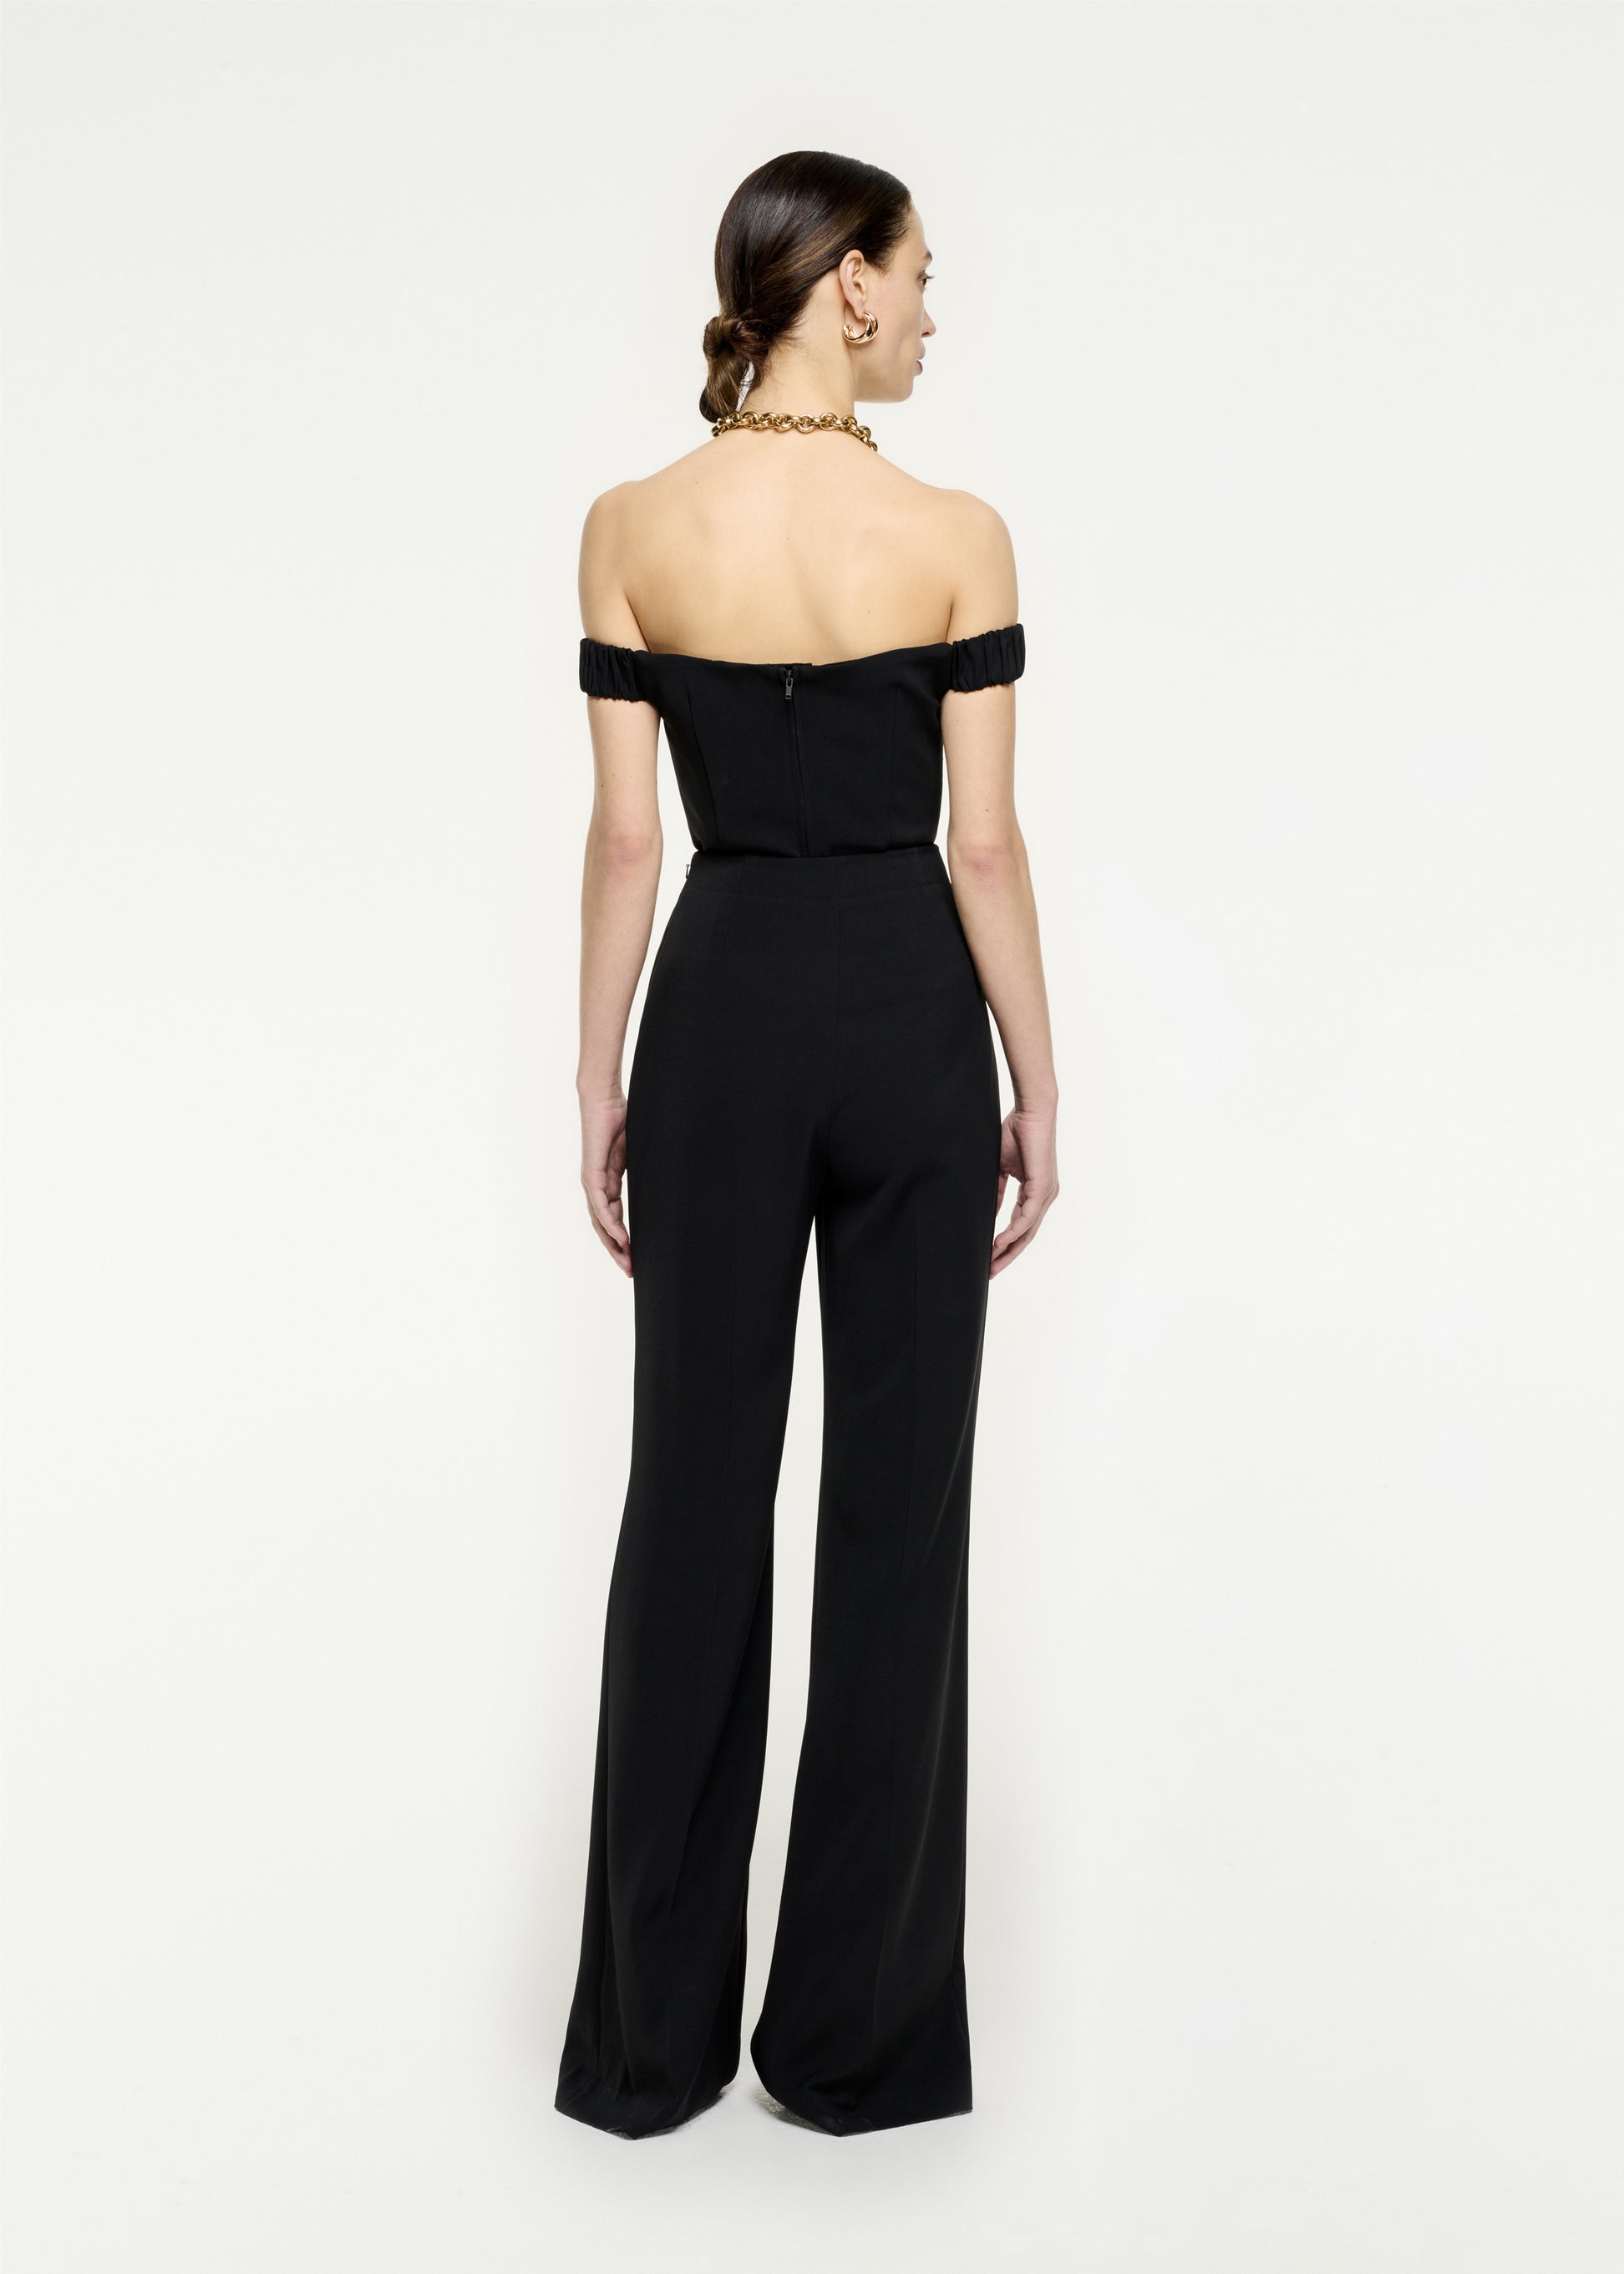 The back of a woman wearing the Off The Shoulder Stretch Cady Top in Black